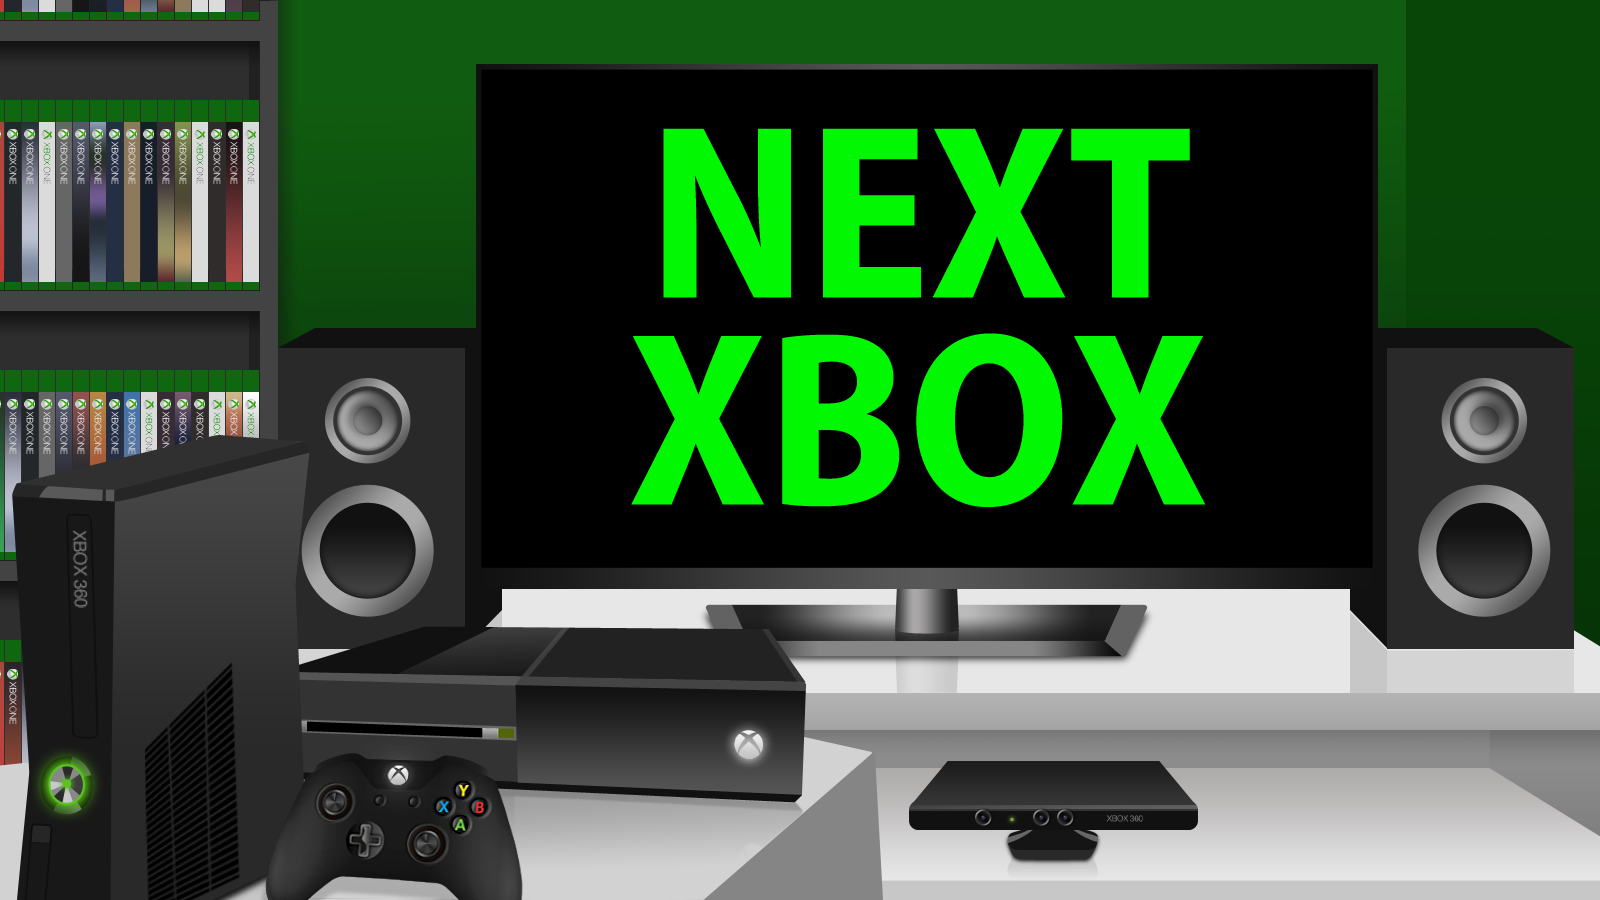 is a new xbox coming out